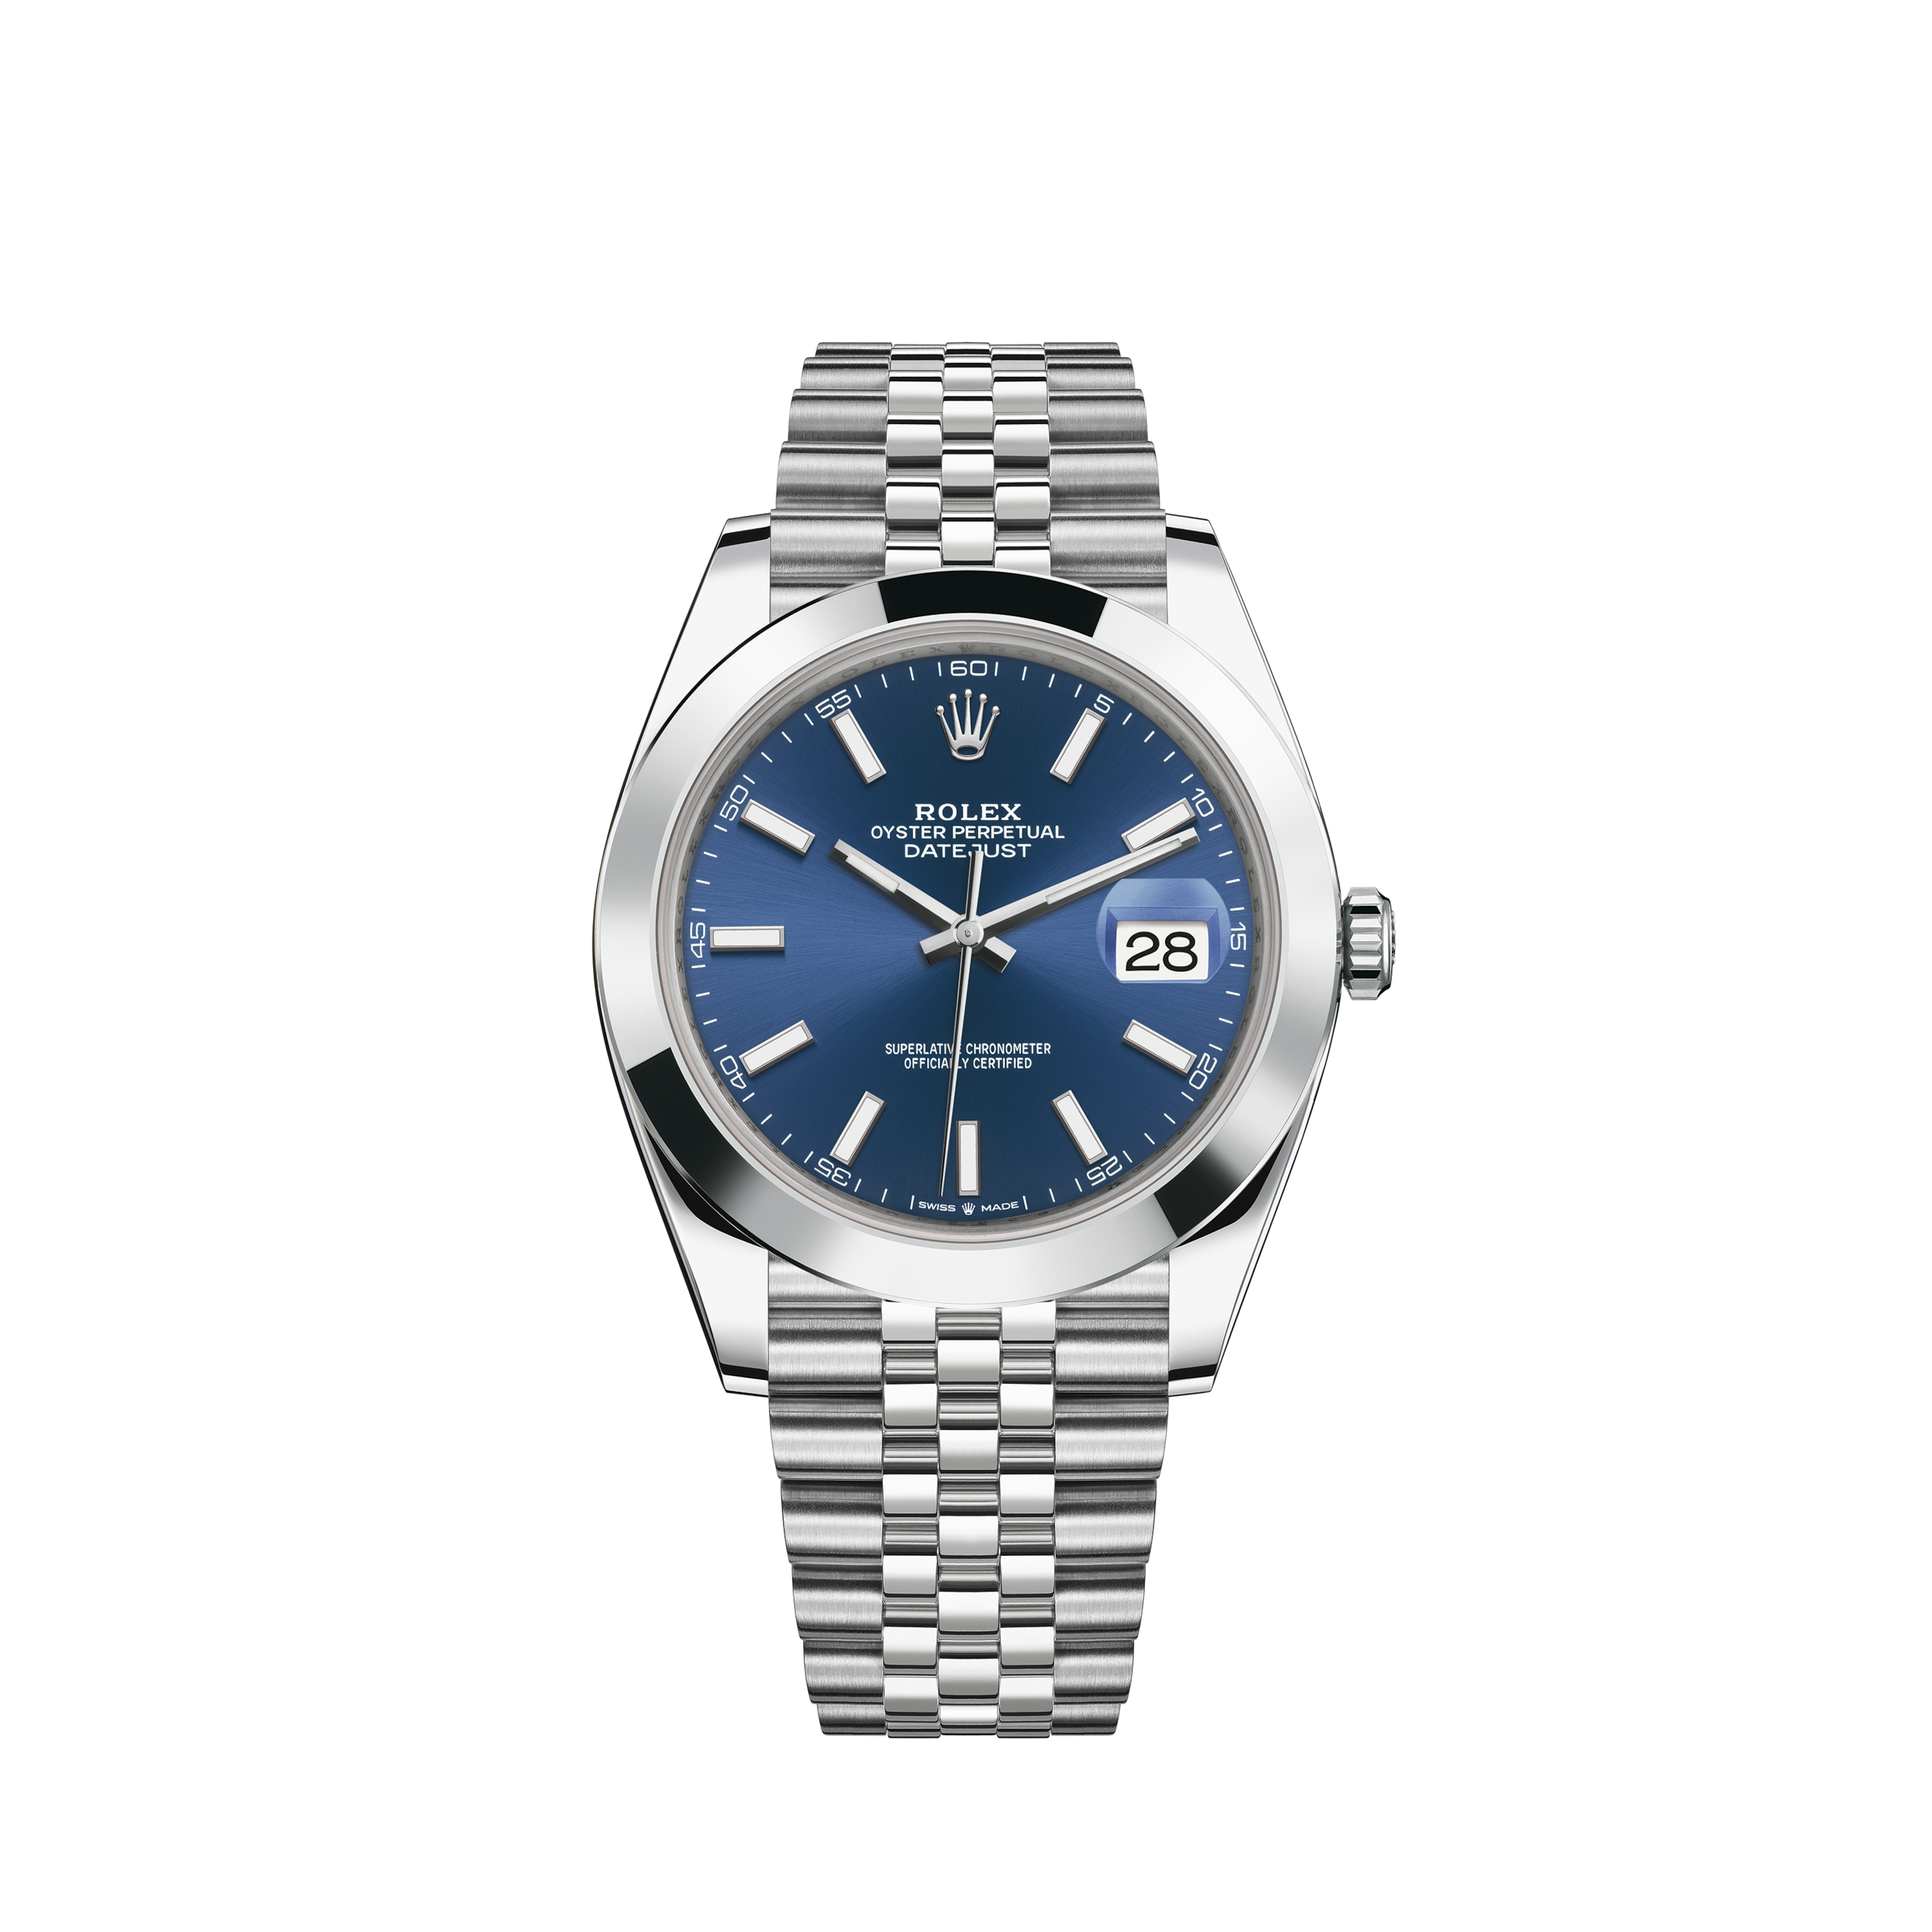 Rolex Ladies Customized Rolex watch 26mm Datejust Stainless Steel Blue Color Dial with Diamond Accent